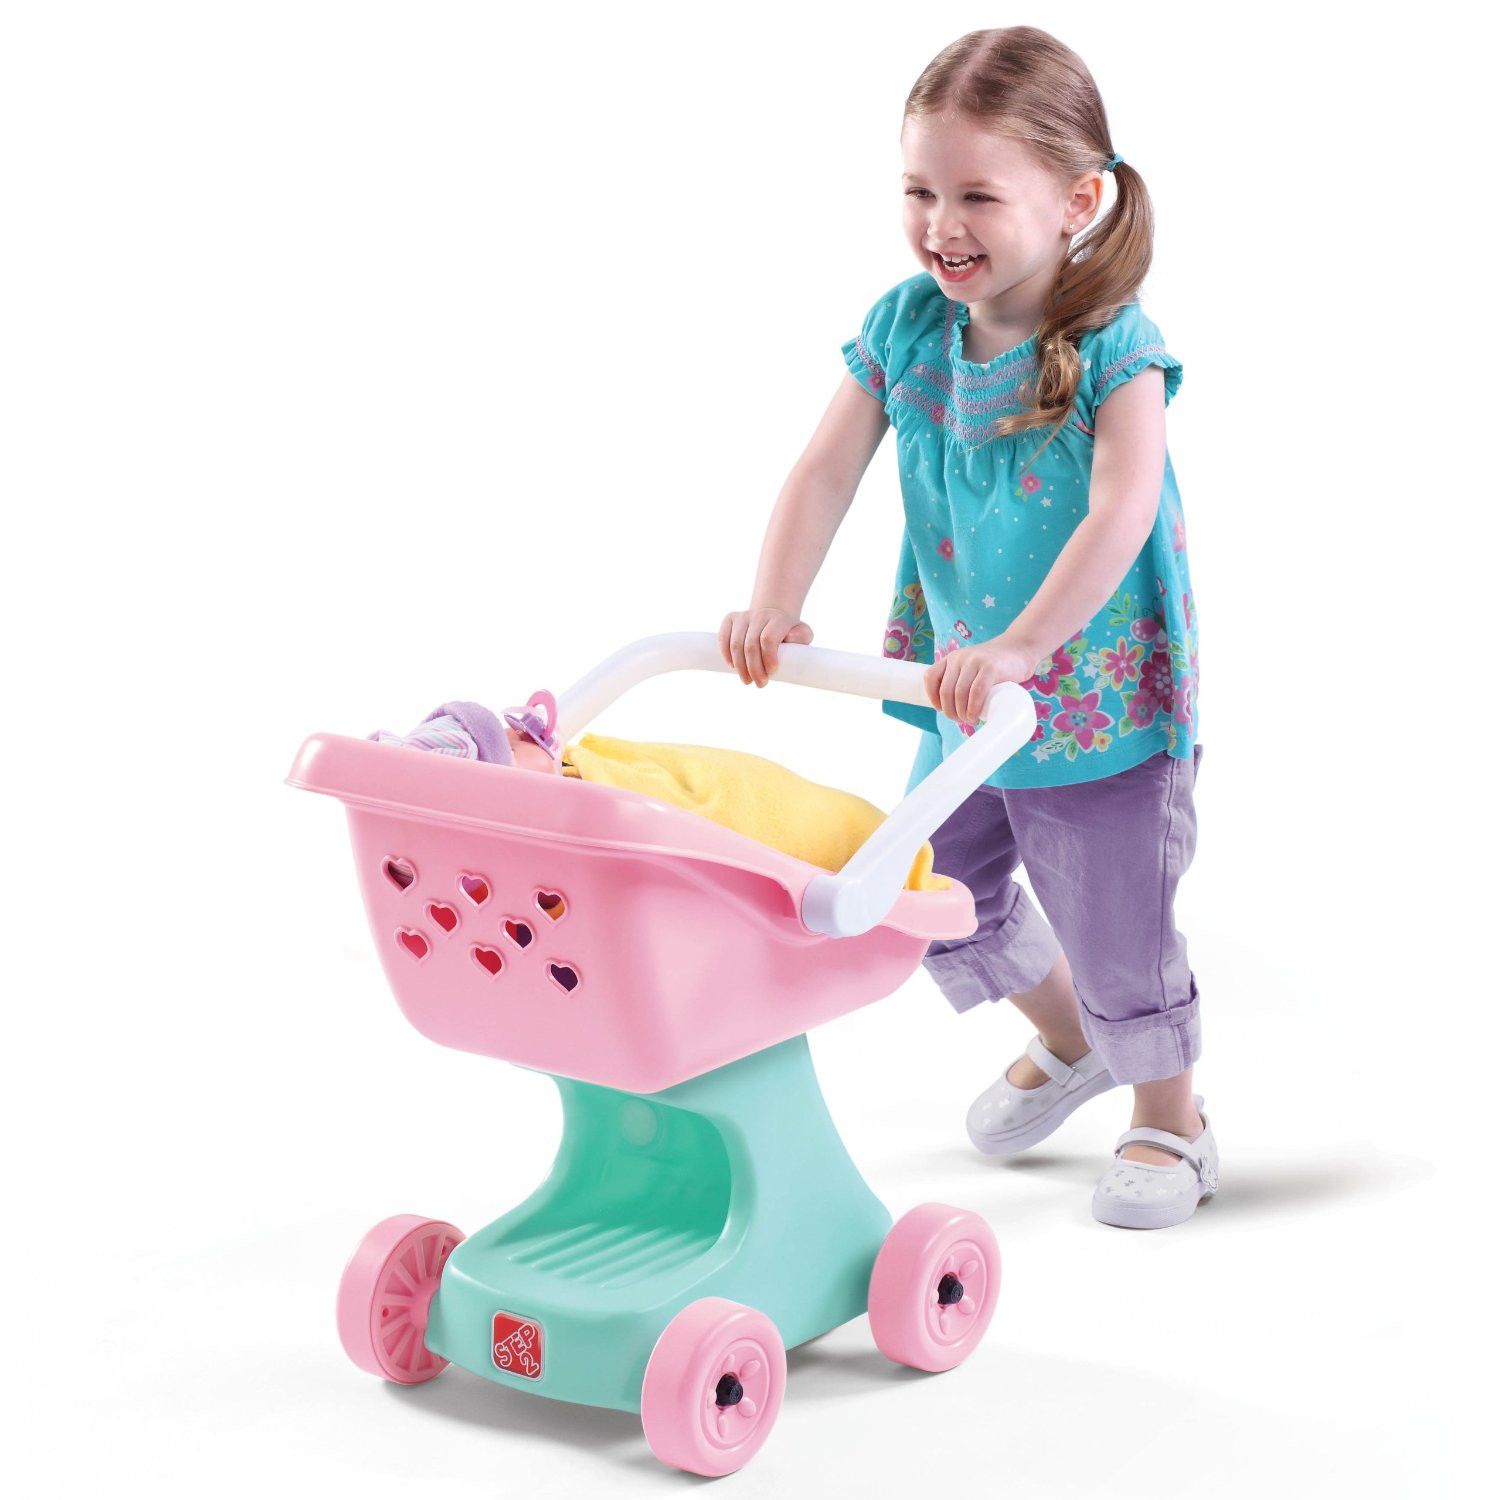 Baby Doll With Stroller Gift Set
 Toy Baby Doll Strollers and Prams Great Gifts for Little